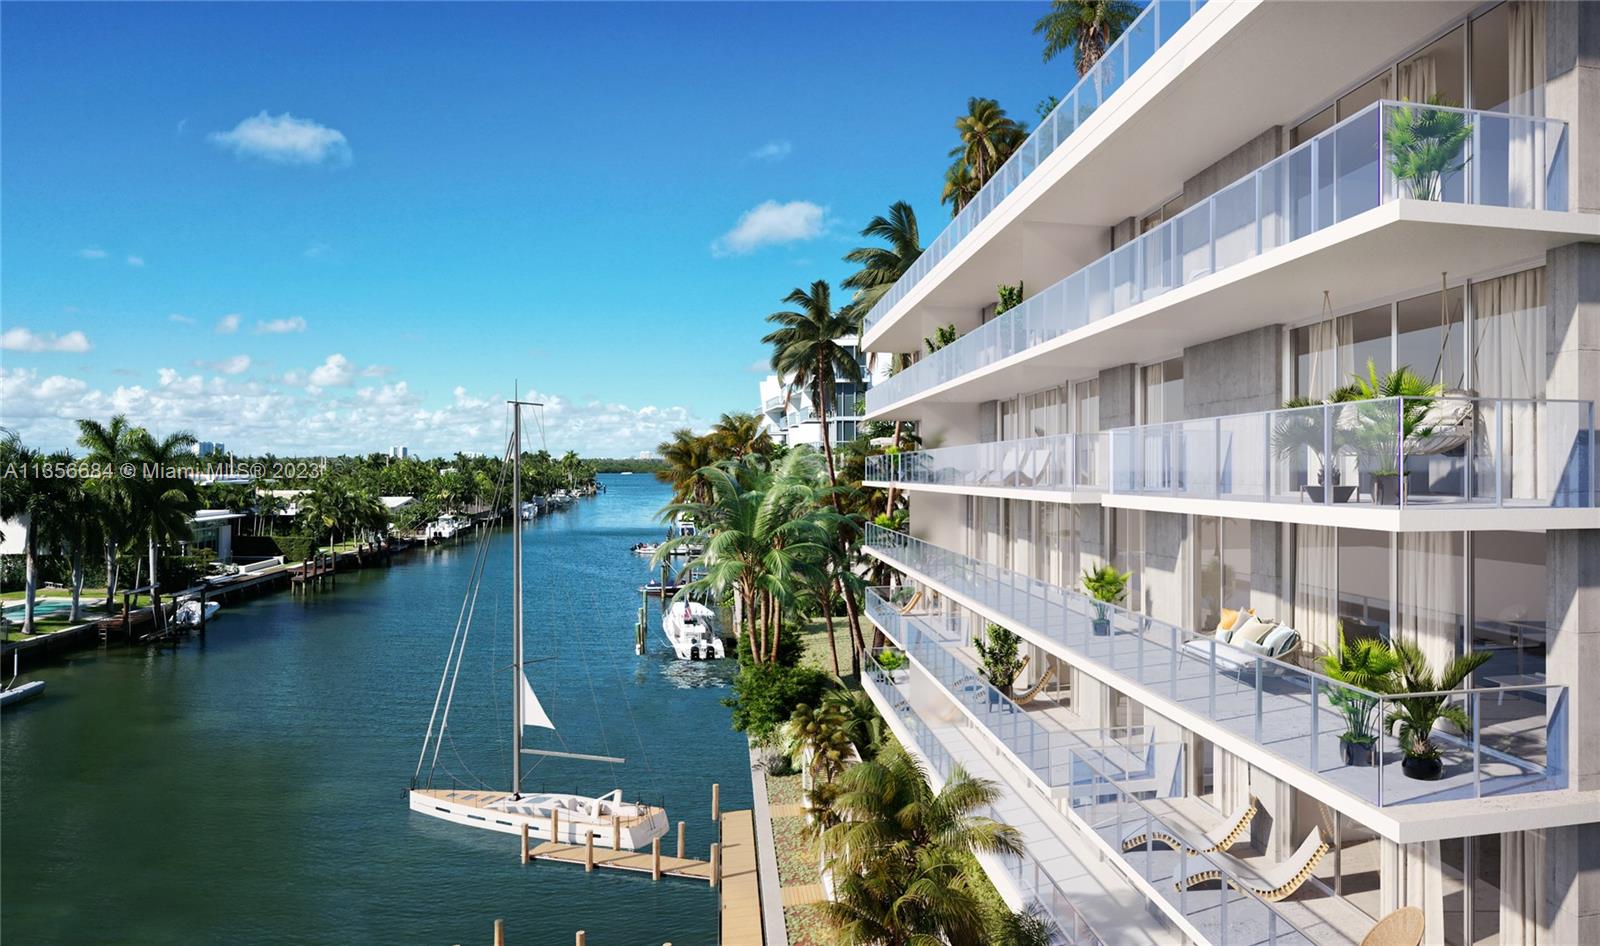 Origin Residences by Artefacto is a luxurious new development located in Bay Harbor Islands, Miami. The project consists of 27 exclusive residences, each designed with exquisite attention to detail and crafted with the finest materials. The interiors are designed by Artefacto, a renowned Brazilian luxury furniture brand known for its sophisticated and contemporary style. The building offers a range of amenities designed to enhance the residents' lifestyle. There is a rooftop pool and deck, a fitness center, a private marina with 10 boat slips, providing easy access to the bay, and more. Bay Harbor Islands is a sought-after location known for its upscale living, excellent schools, and proximity to some of the best shopping, dining, and entertainment in Miami.